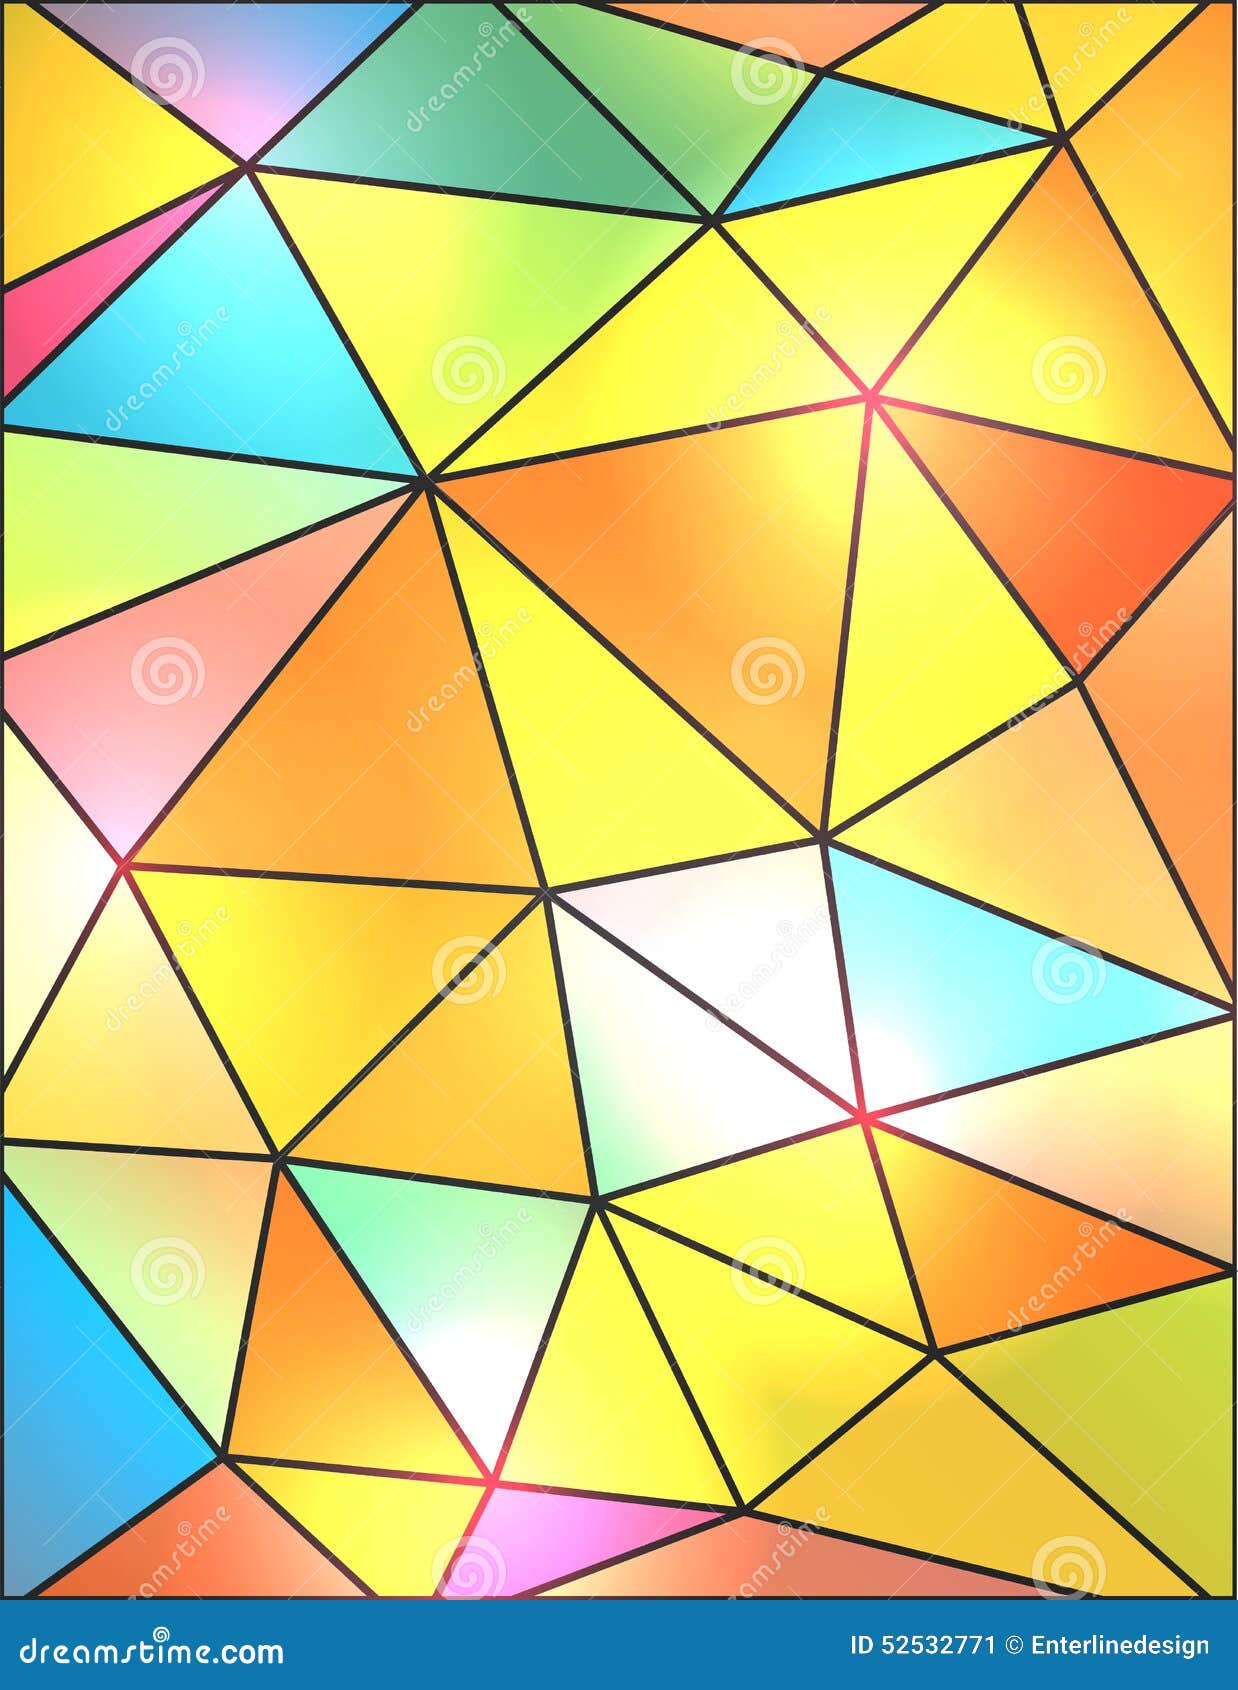 Colorful Abstract Geometric Triangles Background Illustration Stock